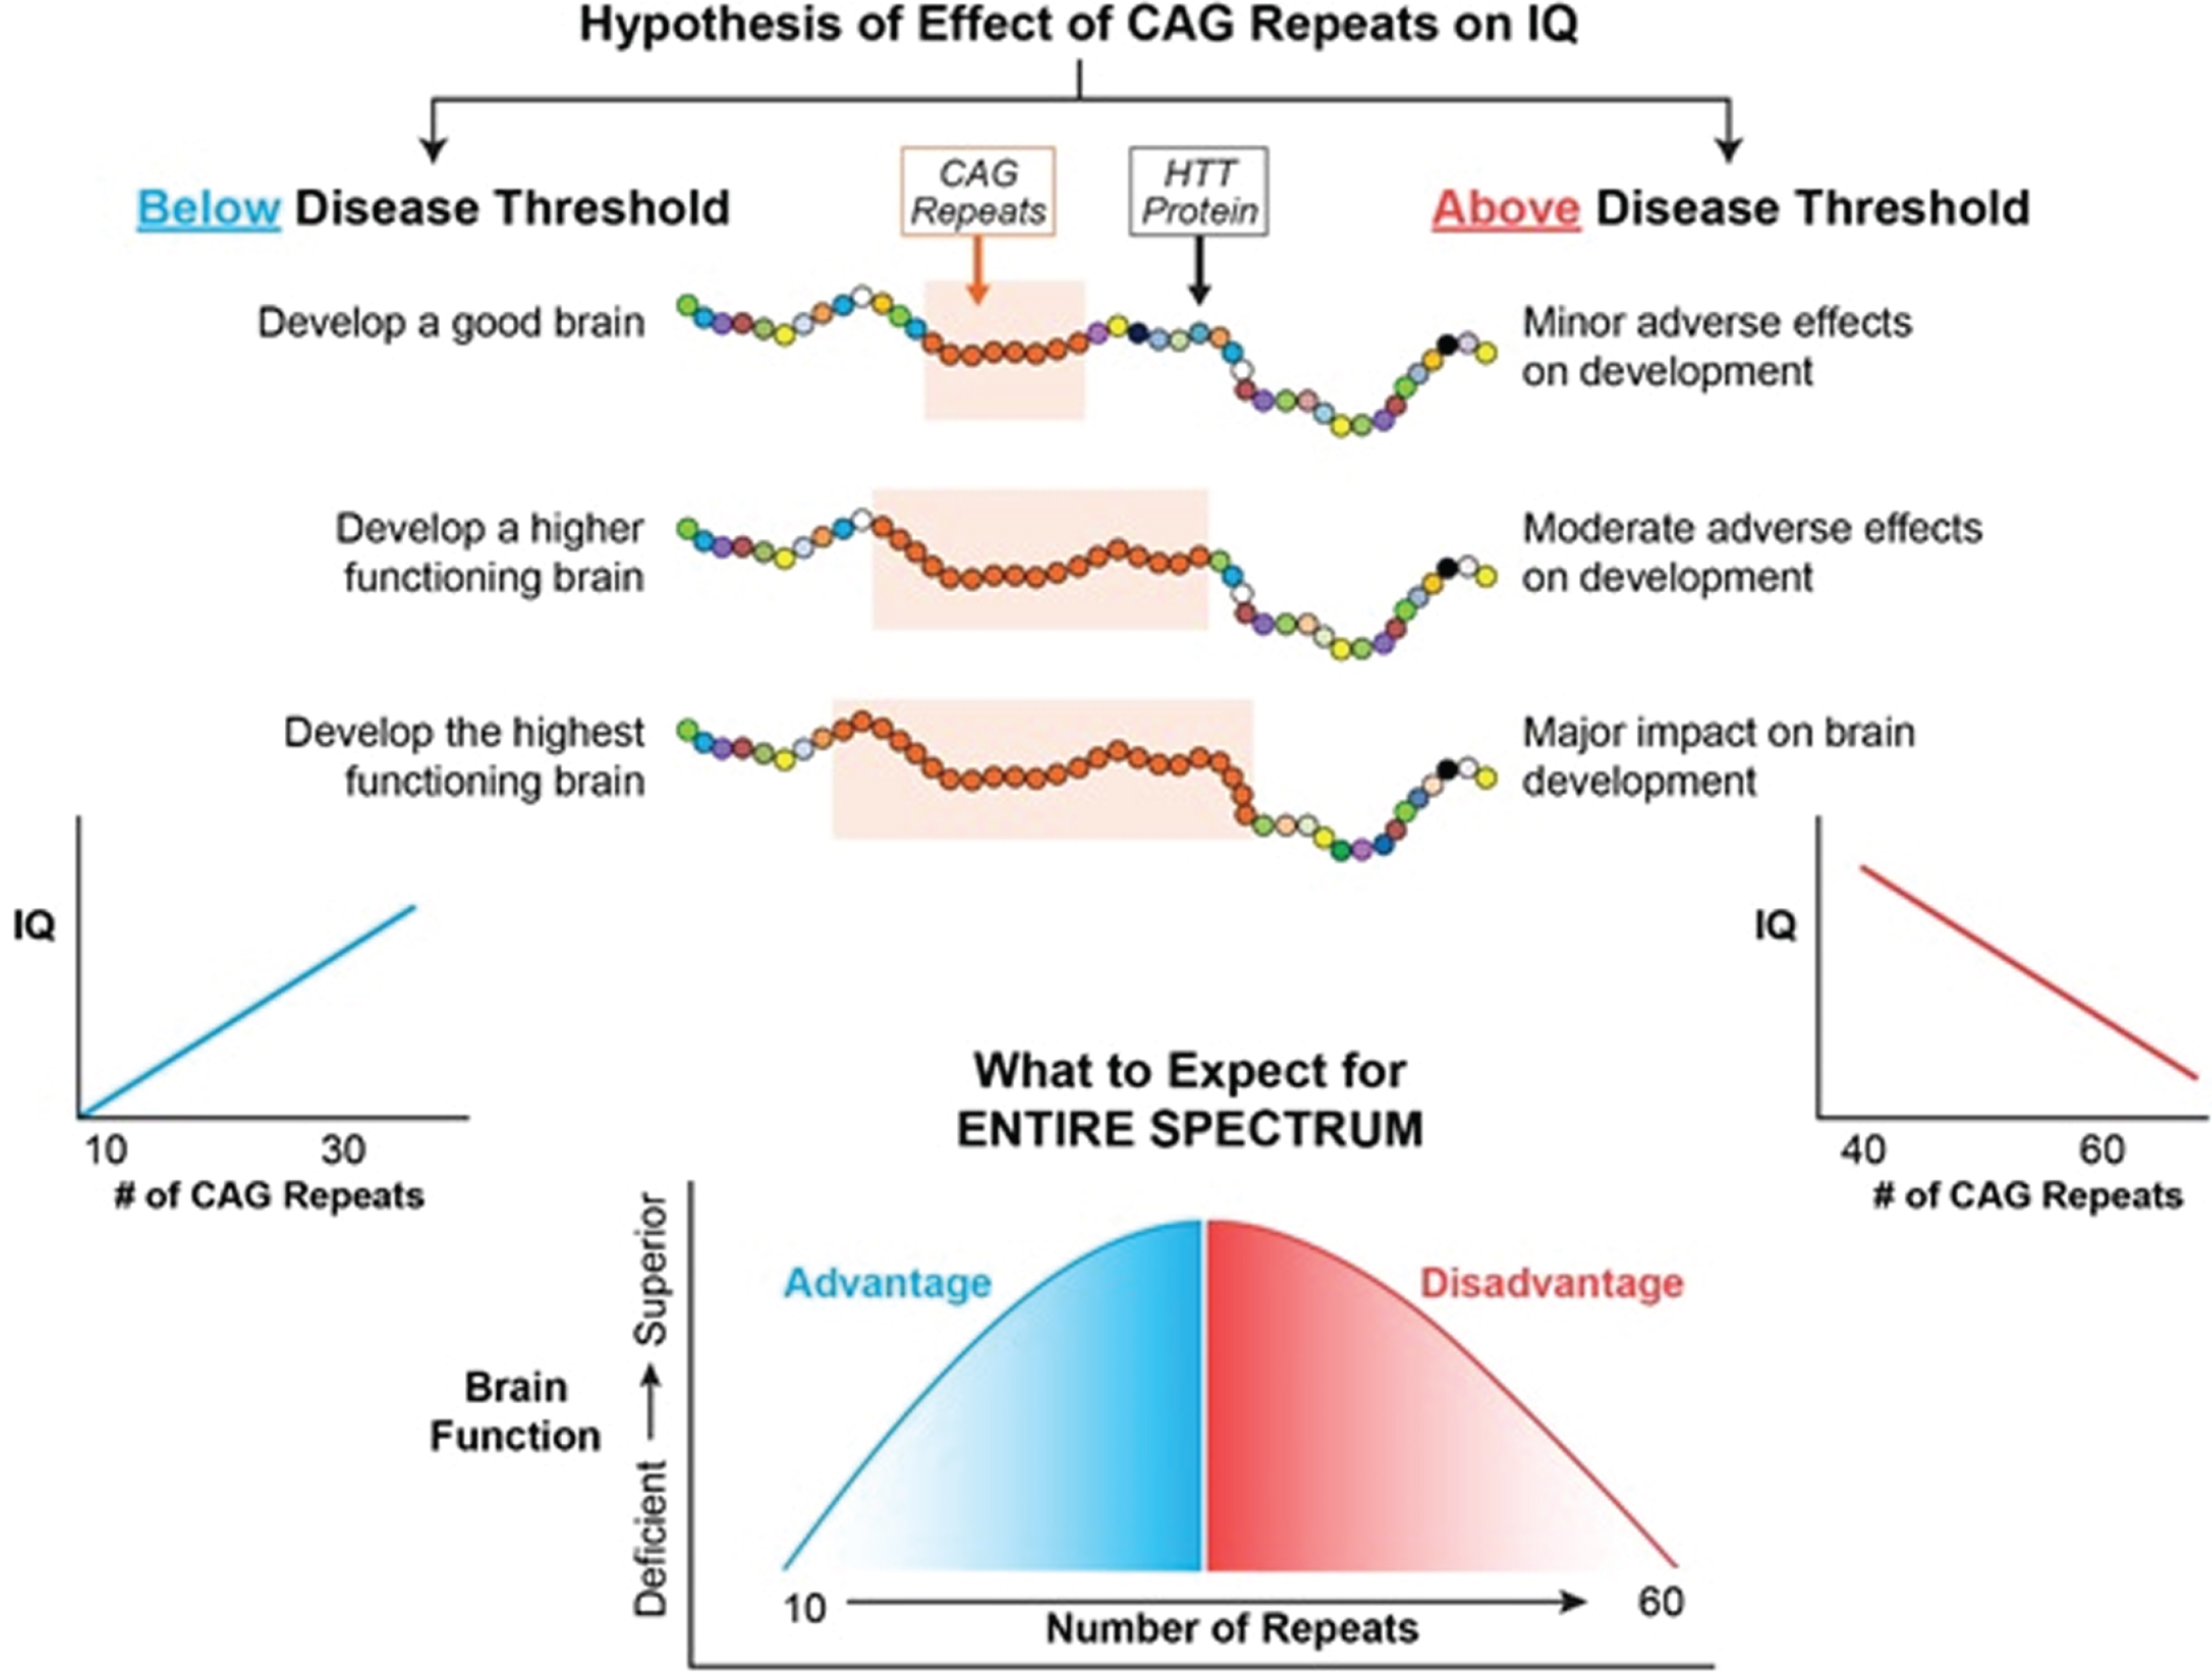 The left side of the figure models how CAG repeats might effect IQ below disease threshold where the right side of the figure models how CAG repeats might effect IQ above disease threshold.